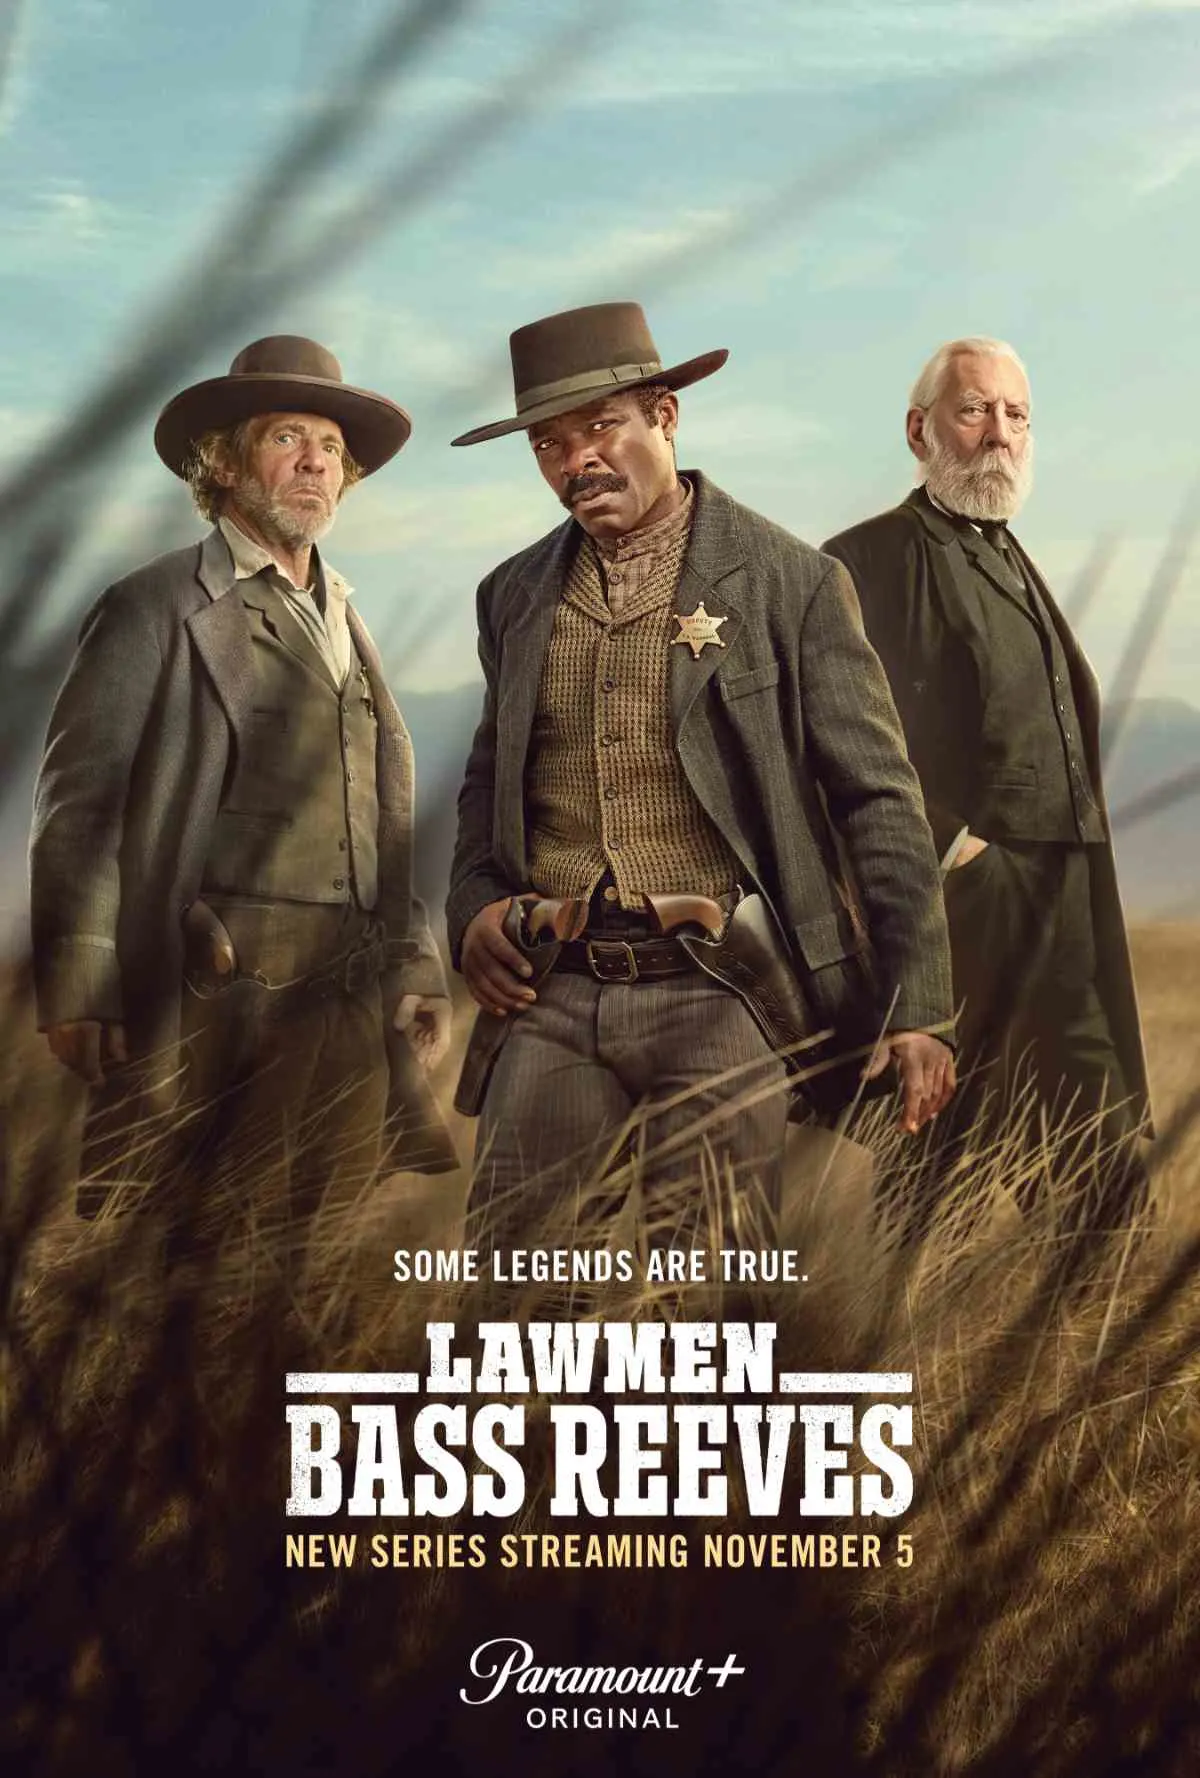 Bass Reeves Trailer and Key Art Unveiled